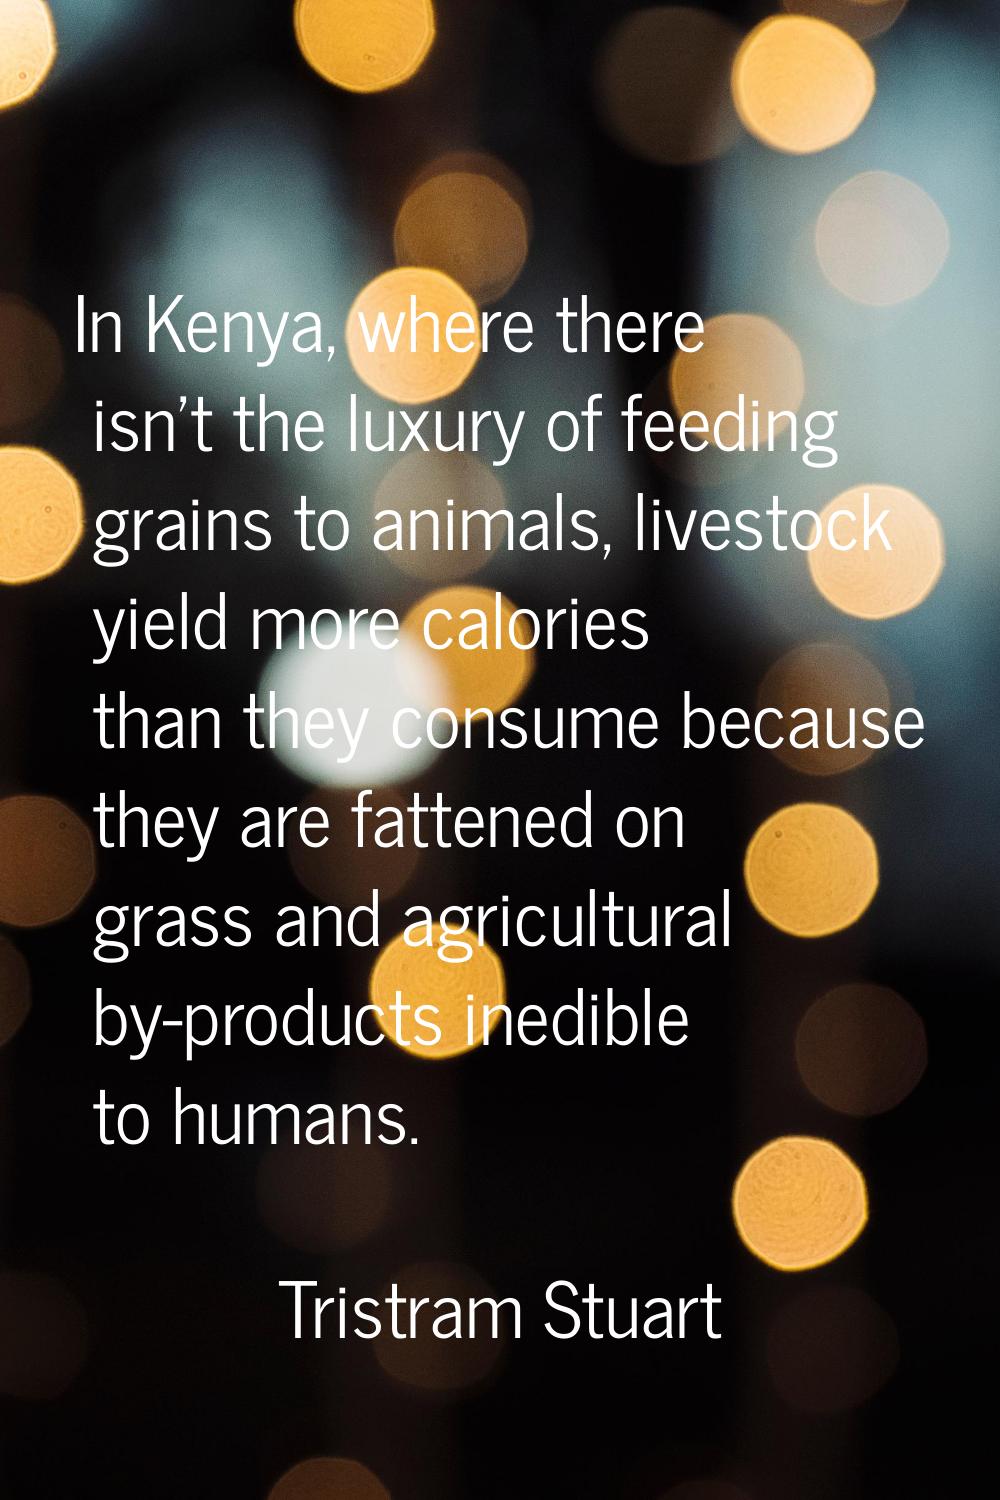 In Kenya, where there isn't the luxury of feeding grains to animals, livestock yield more calories 